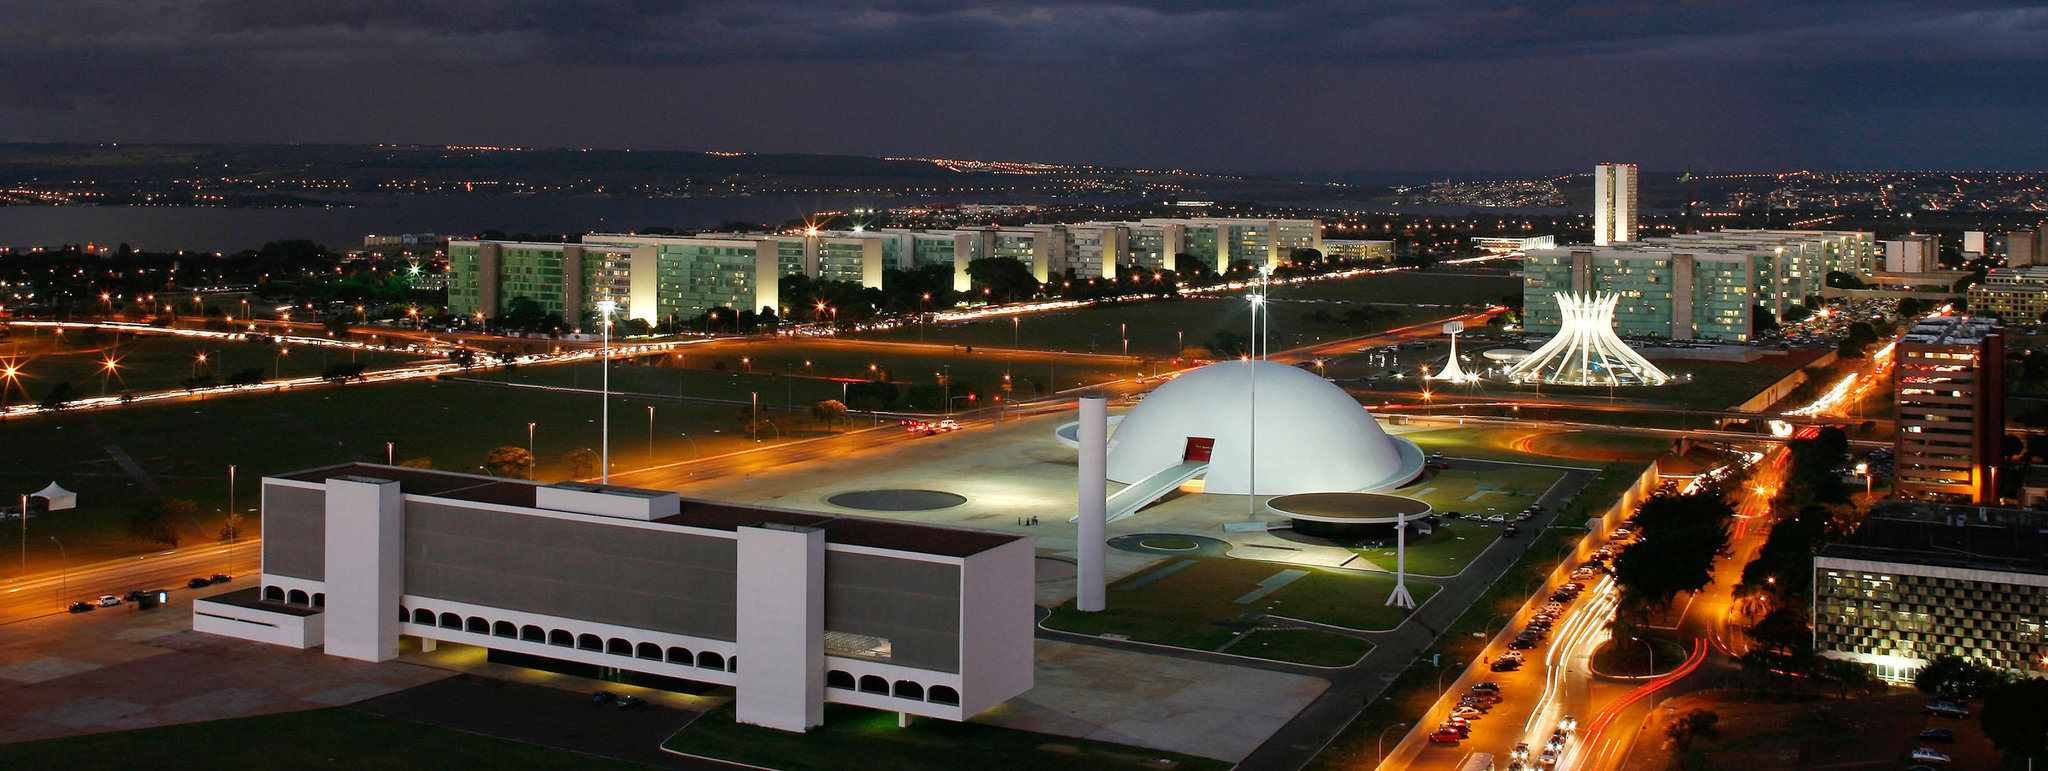 Brasilia central government district. (Photo internet reproduction)